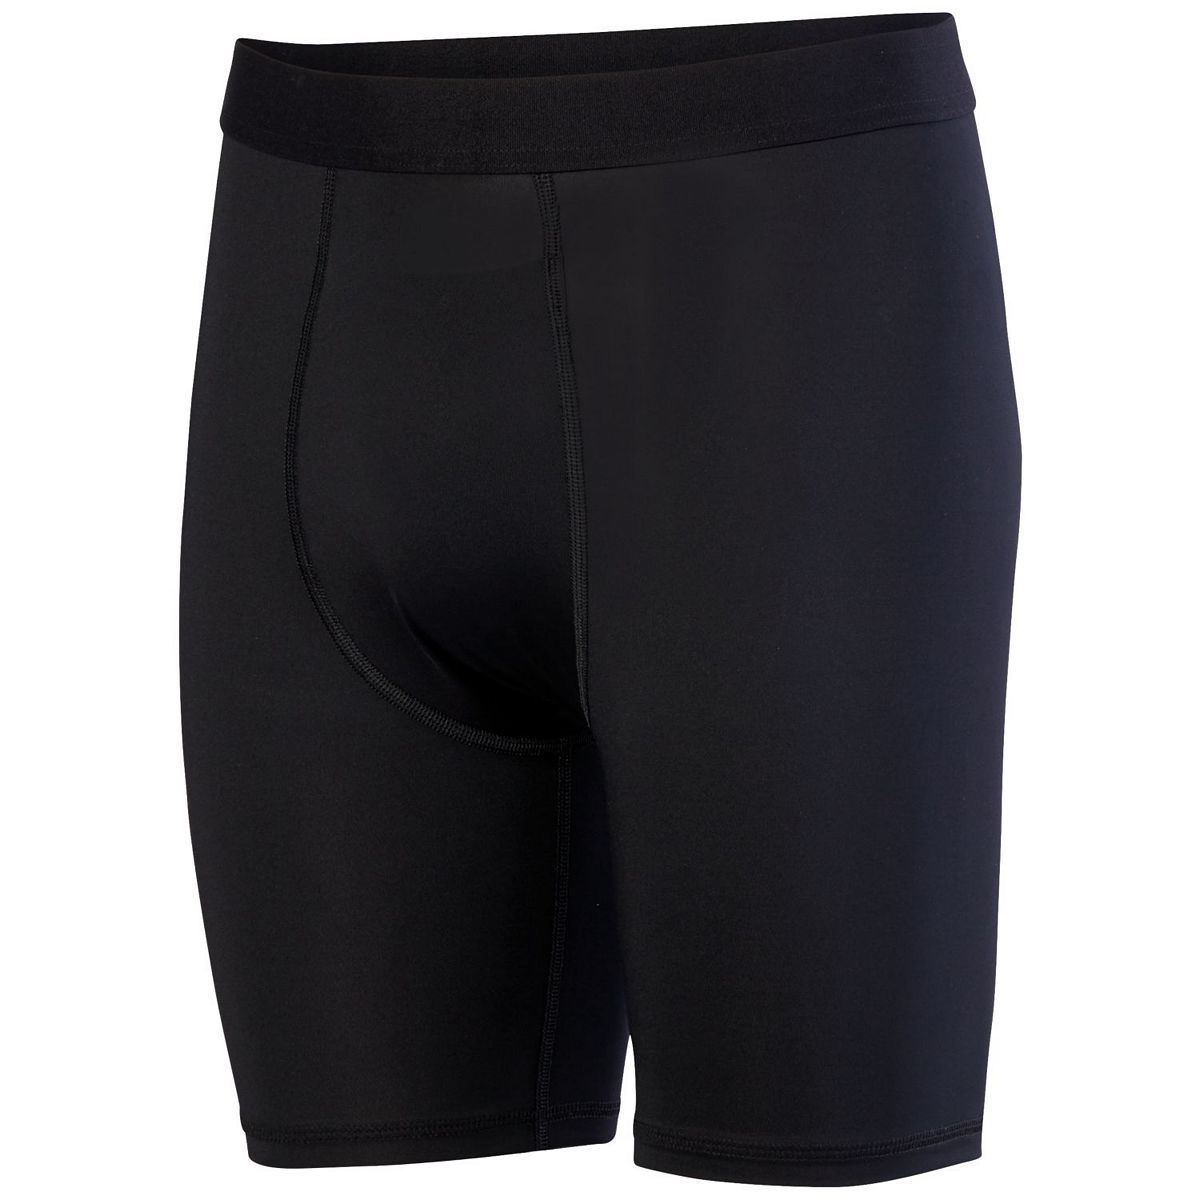 Youth Hyperform Compression Shorts 2616